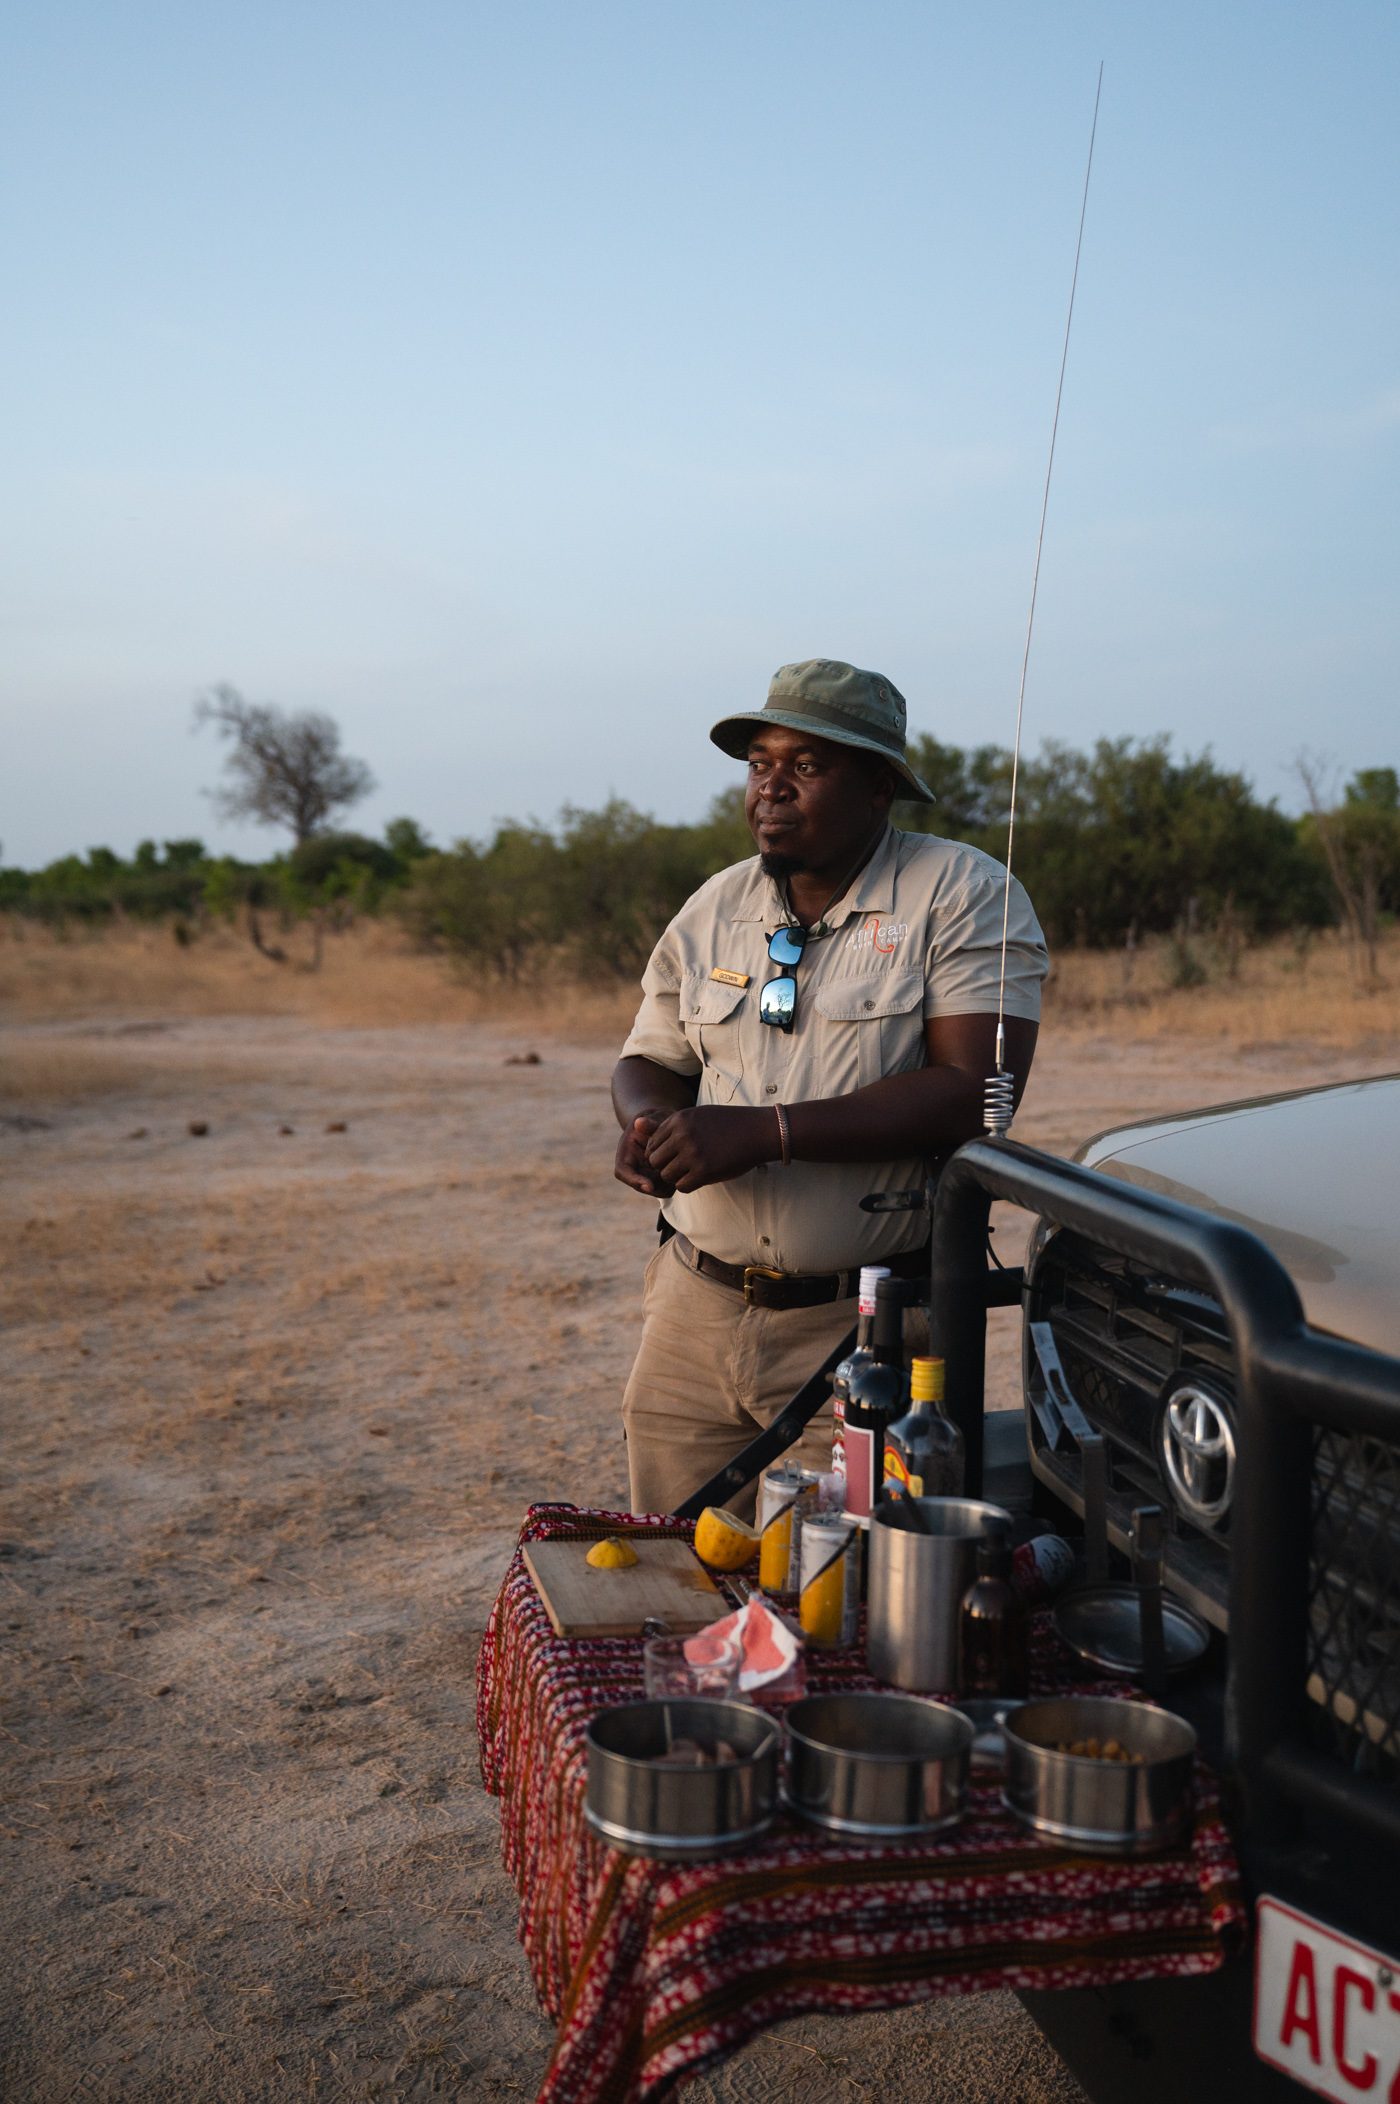 Our guide Godwin from African Bush Camps